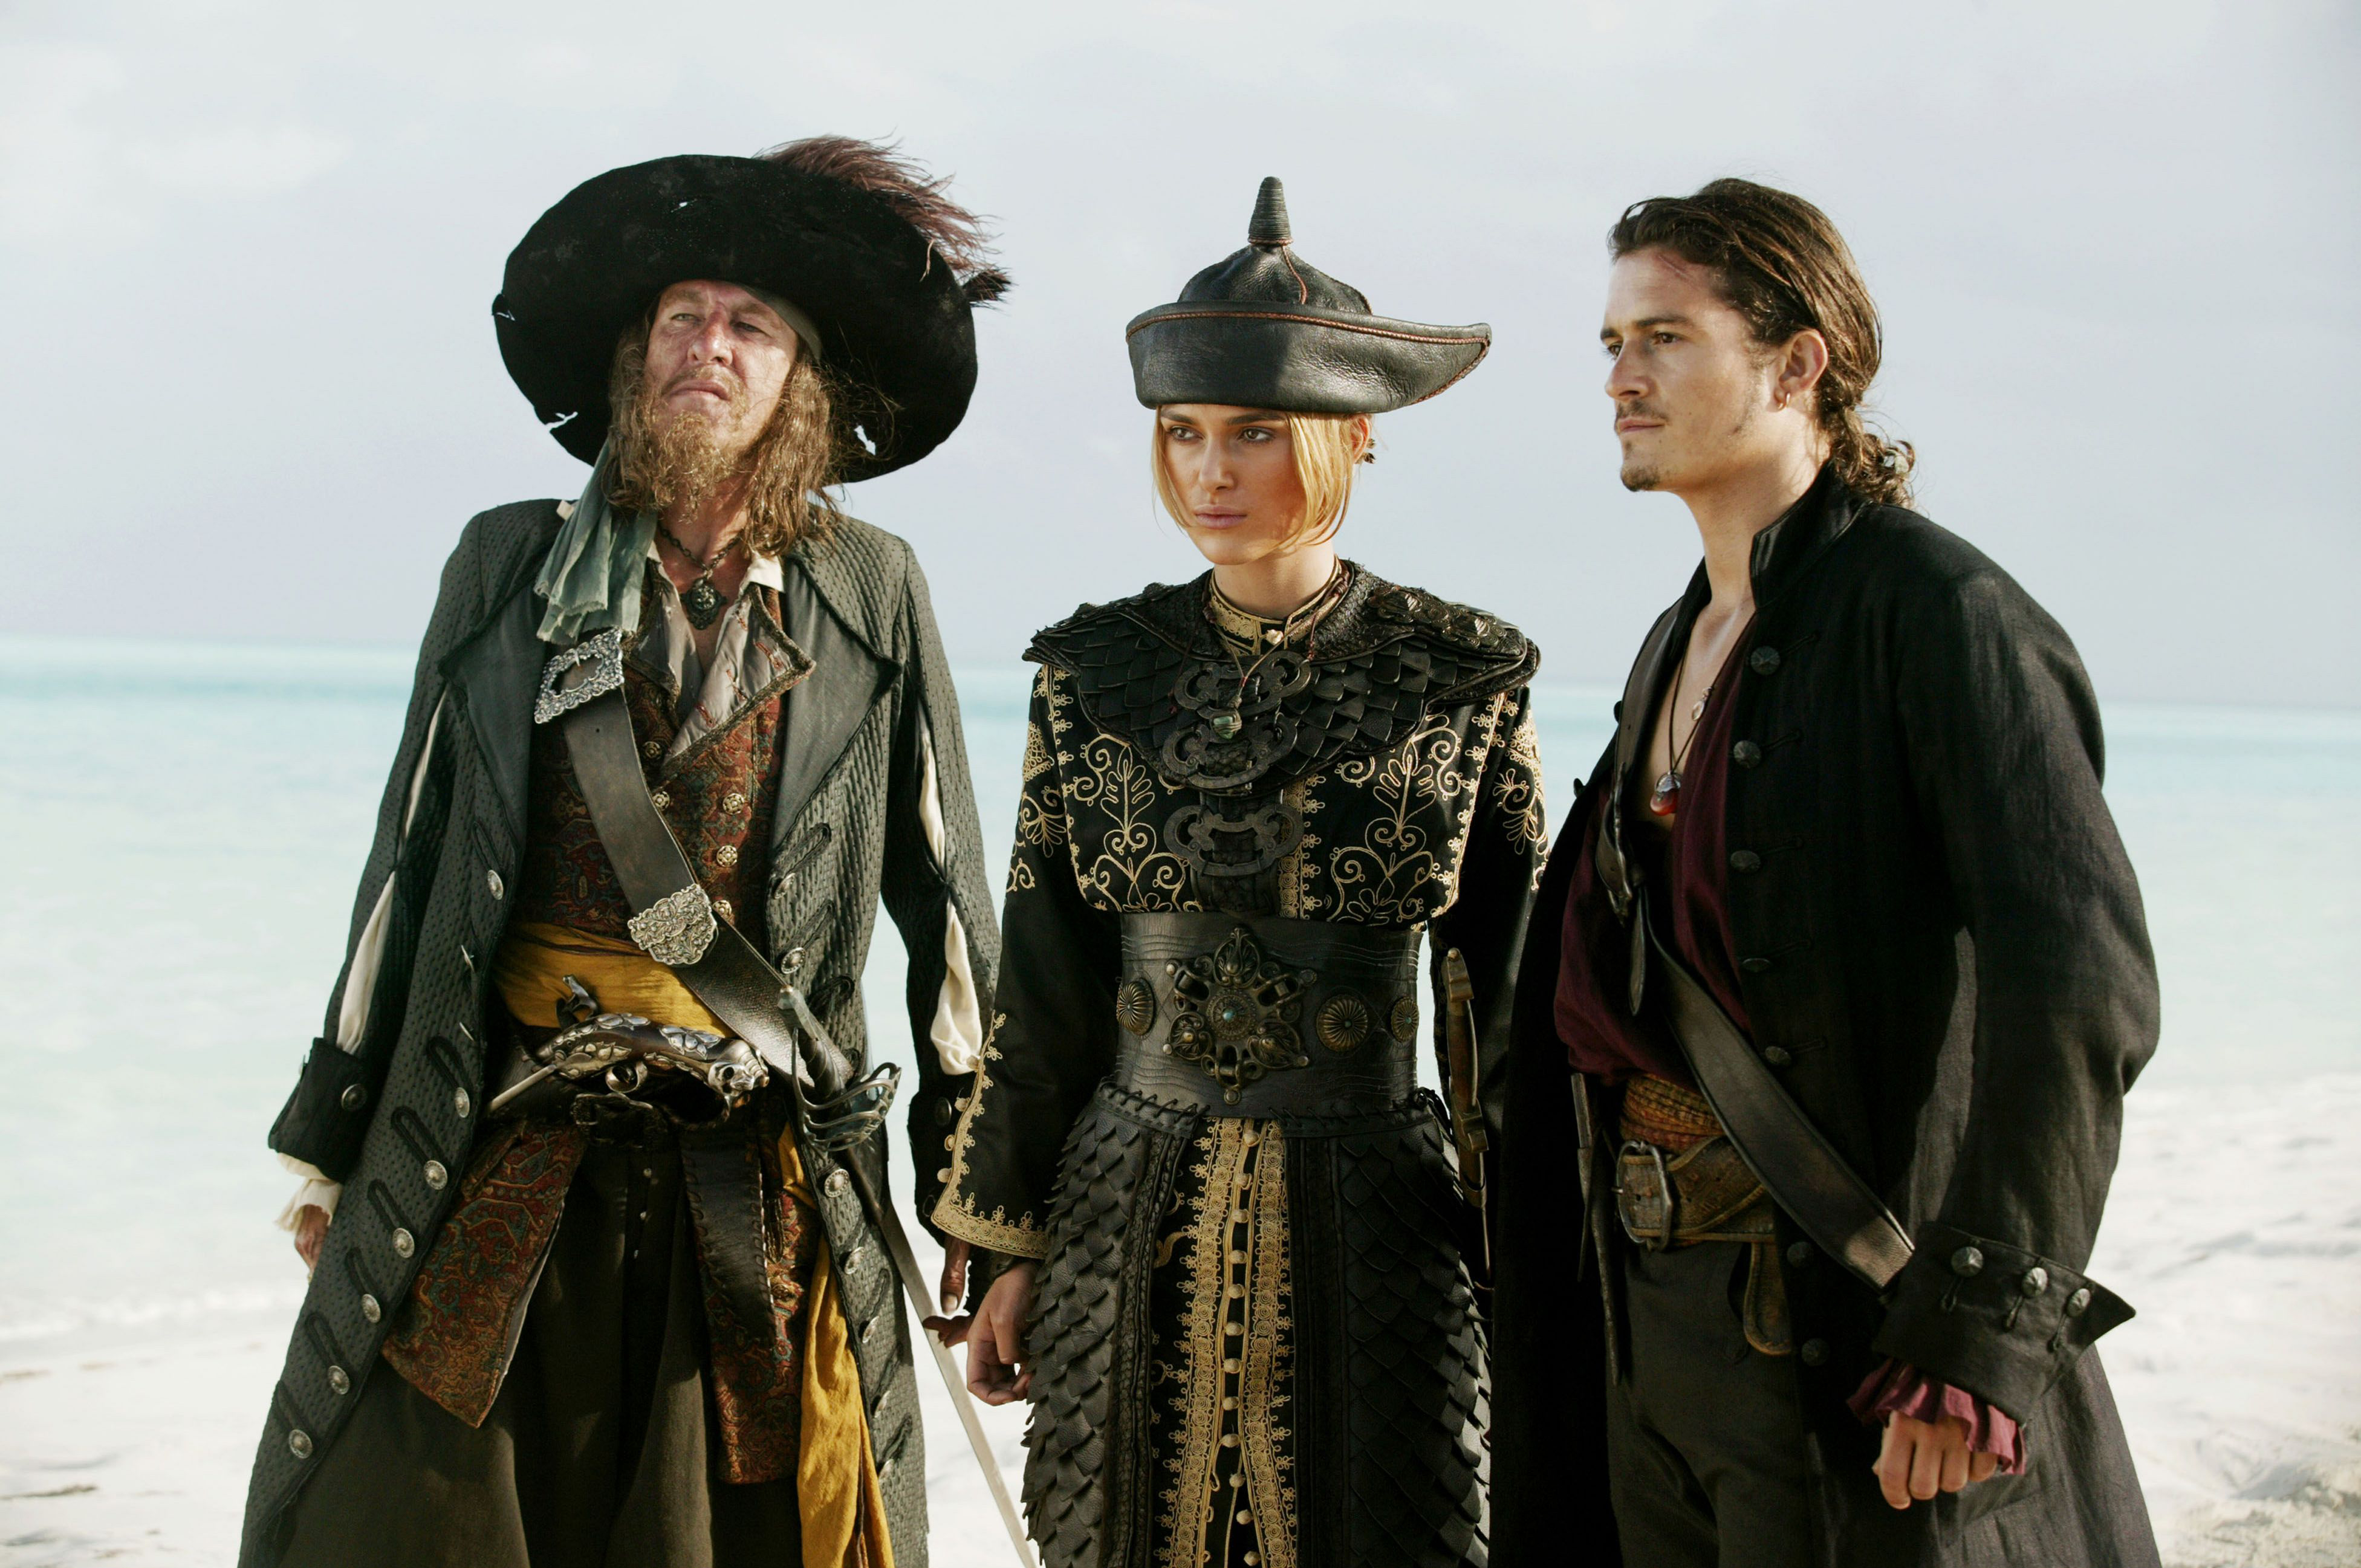 movie, pirates of the caribbean: at world's end, elizabeth swann, geoffrey rush, hector barbossa, keira knightley, orlando bloom, will turner, pirates of the caribbean 1080p